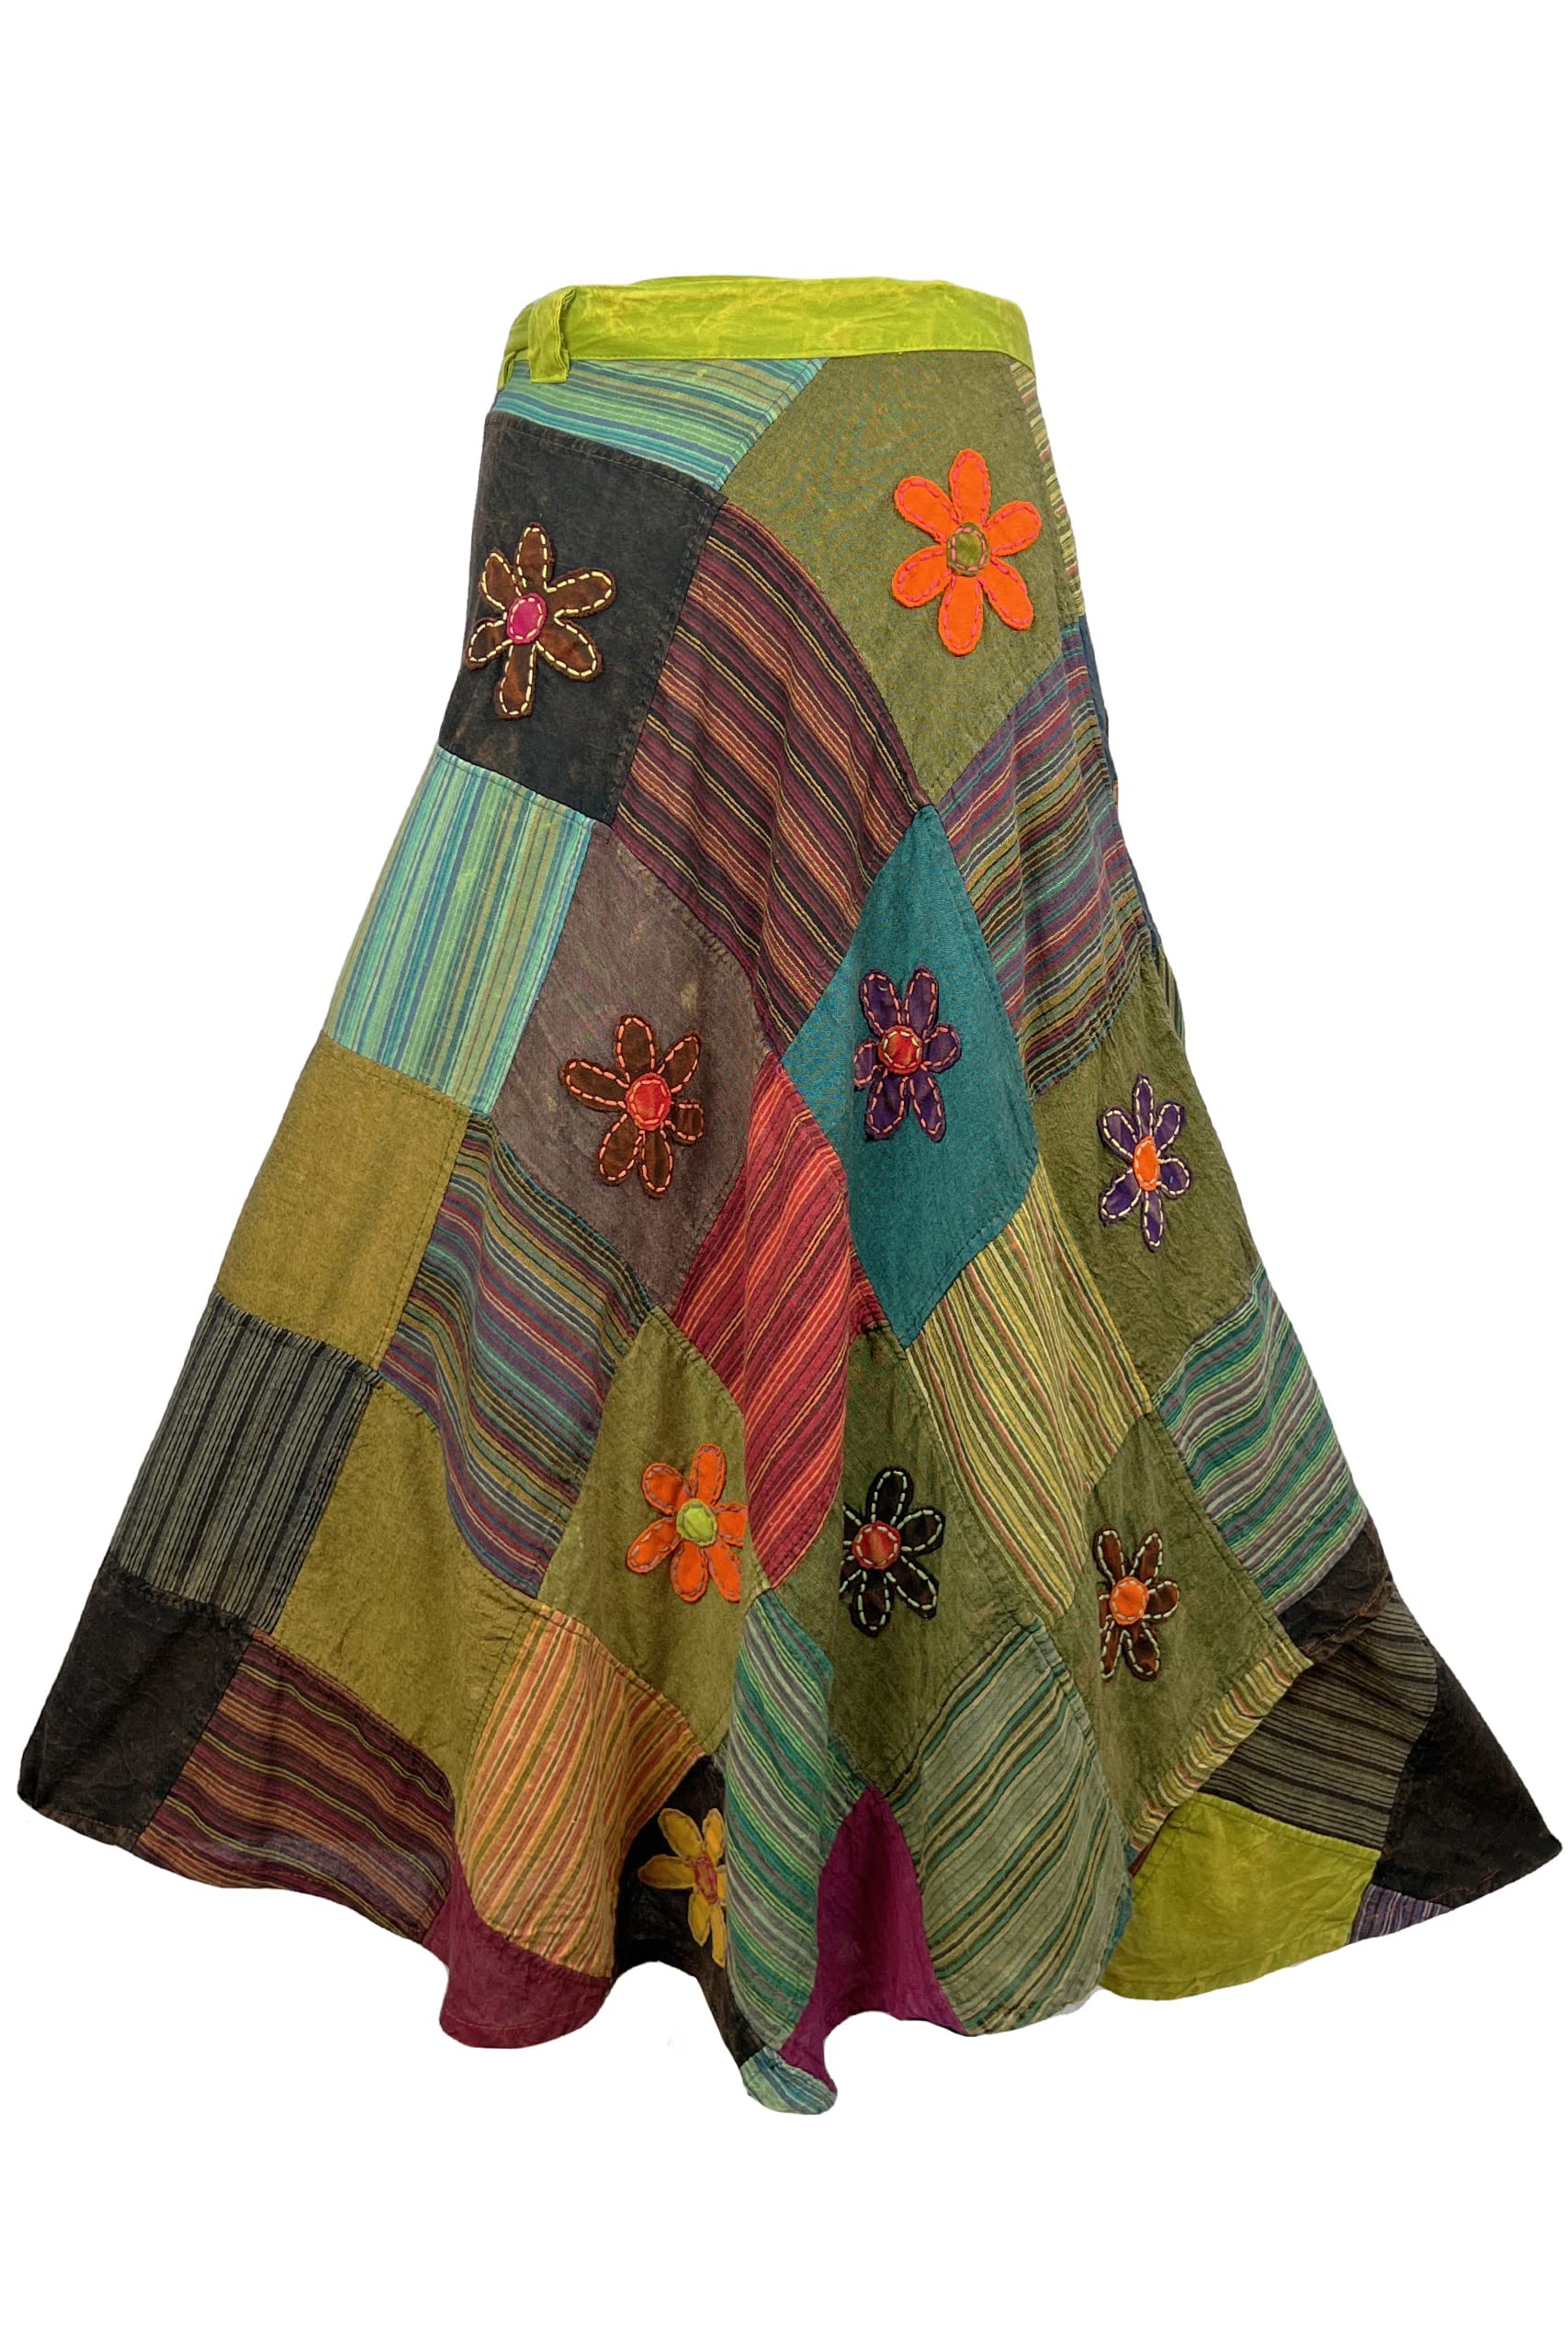 400 WS Cotton Gypsy Flower Diamond Patched Wrap Skirt – Agan Traders